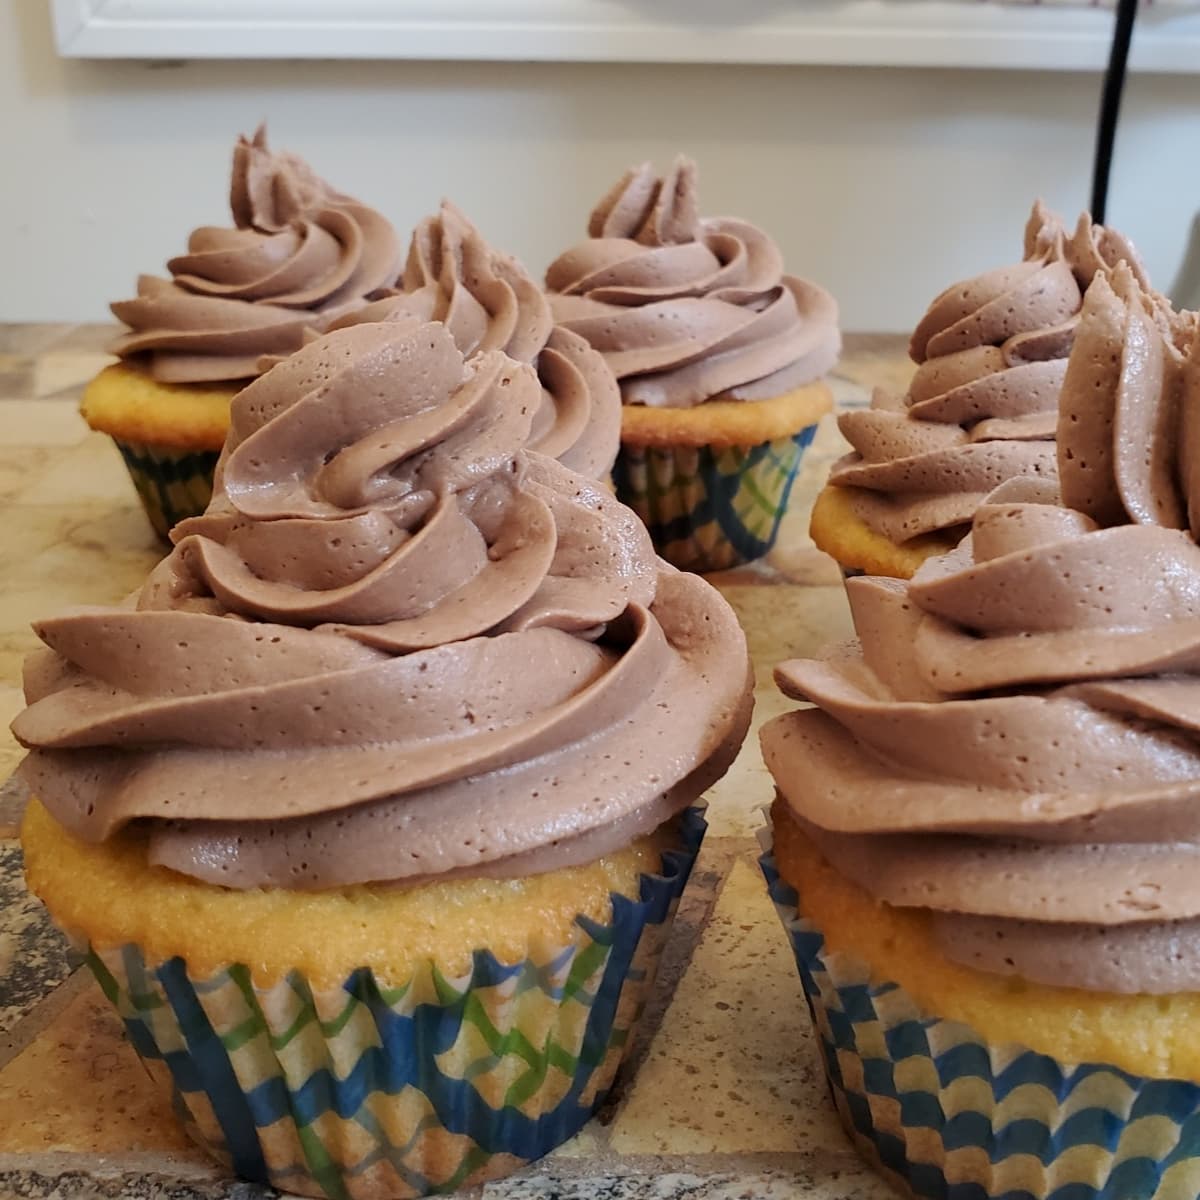 Vanilla cupcakes with chocolate buttercream piped on the top. Chocolate buttercream recipe is from Cleveland cooking